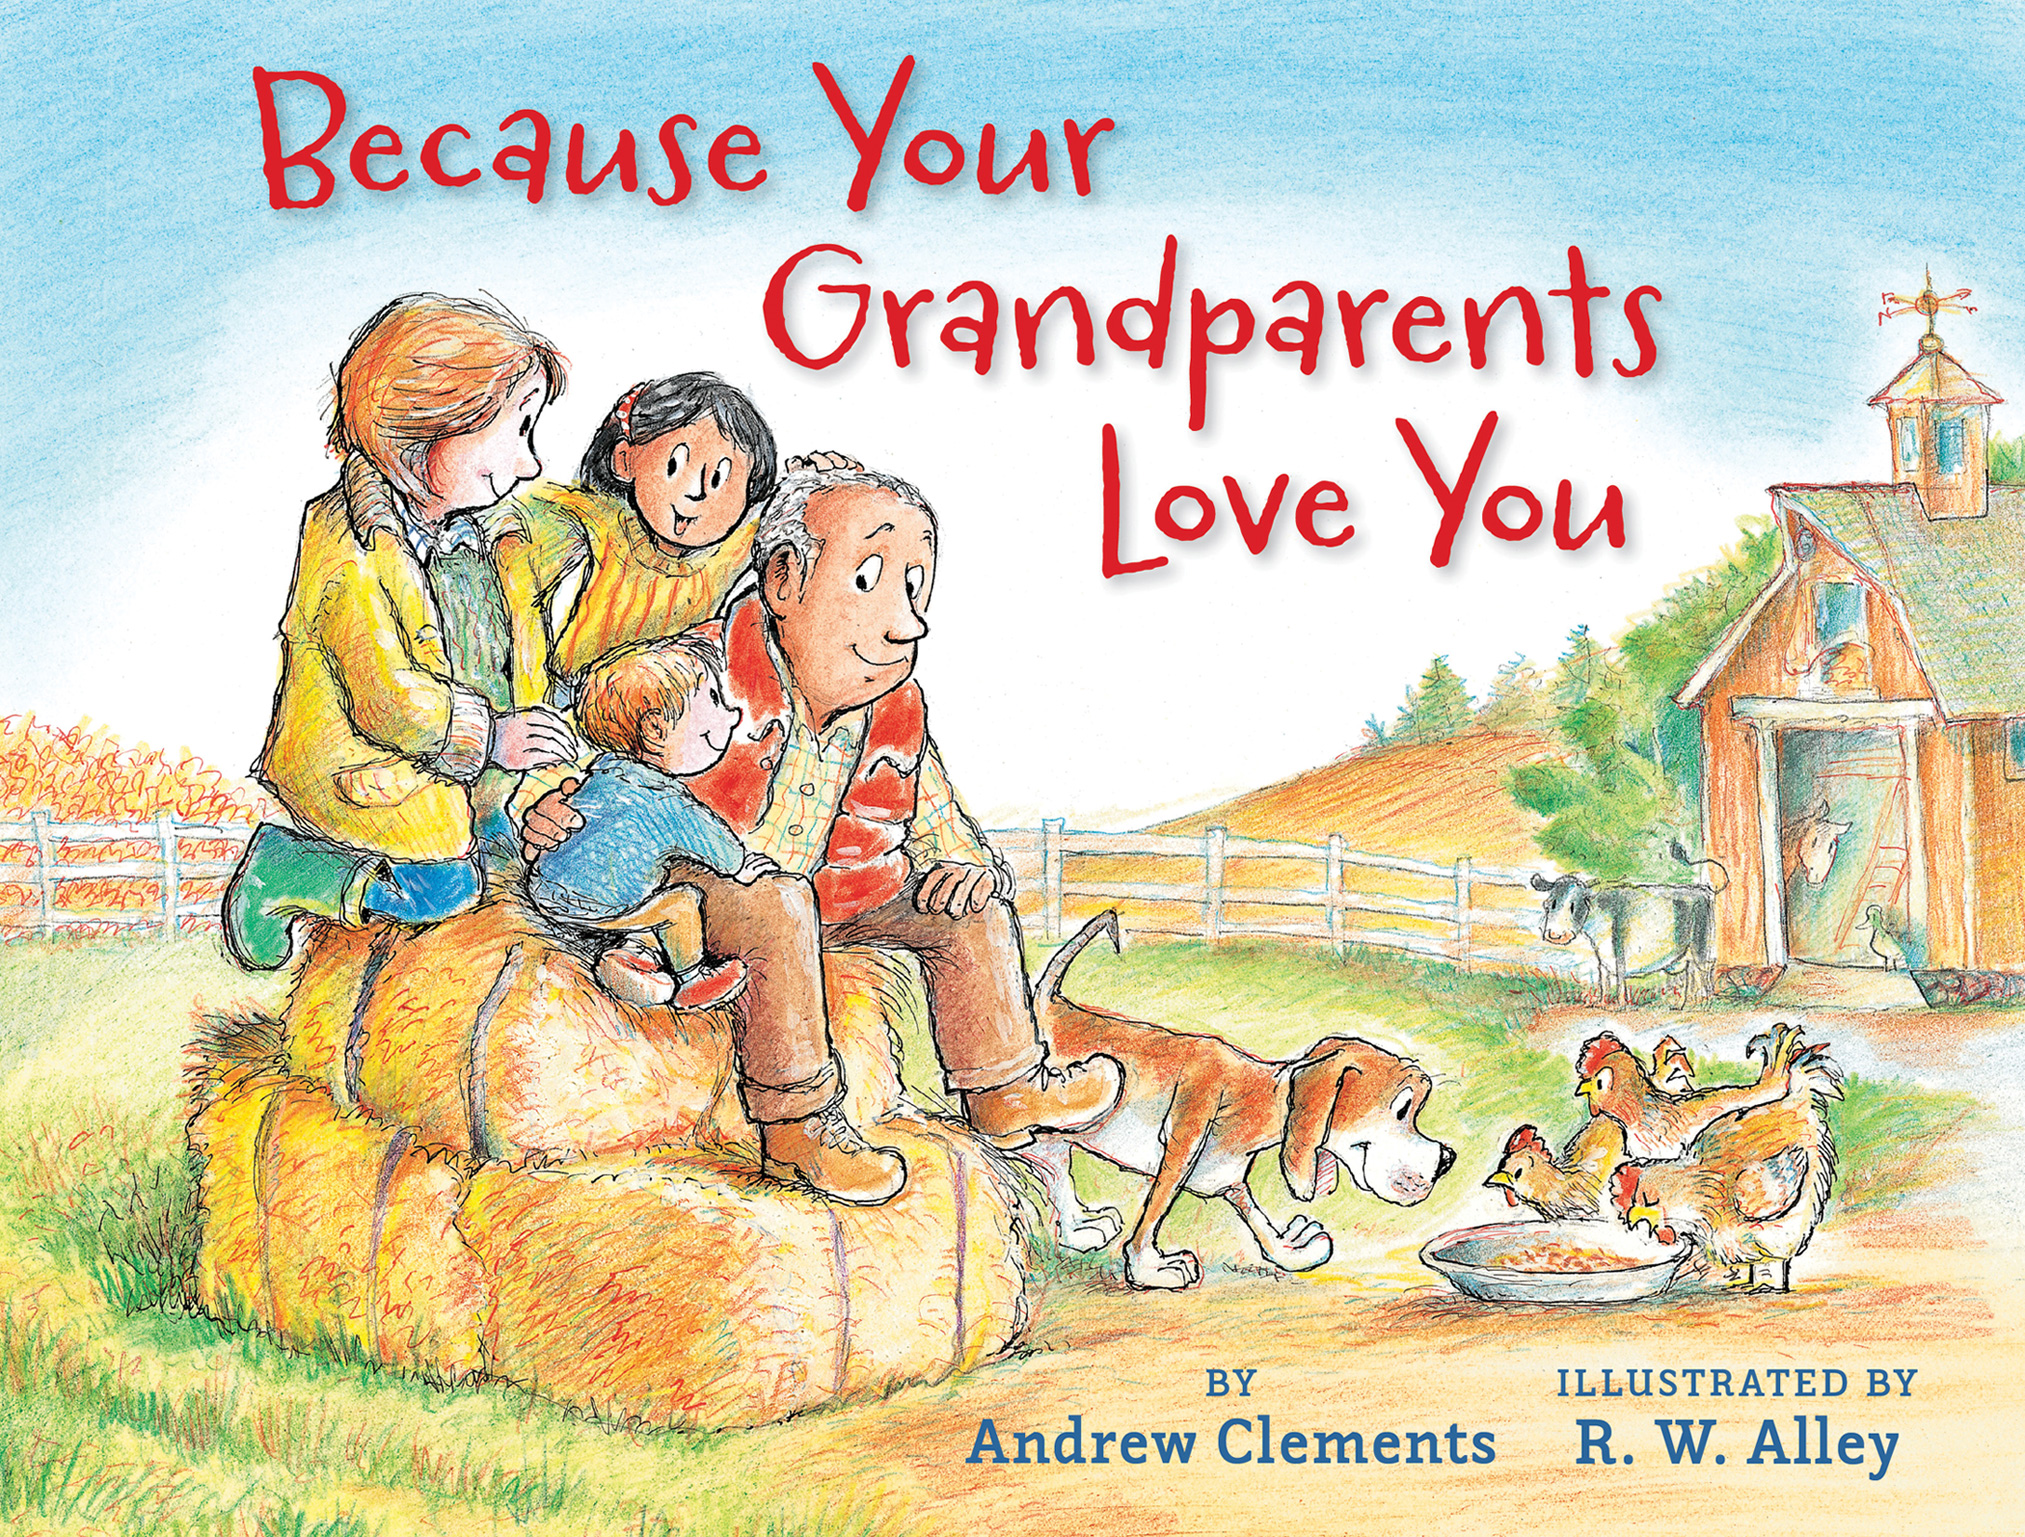 Do your grandparents. Grandpa's book. My grandparents Love going to the Theatre. Ask your grandparents and your parents about popular Toys. ASJ you grandparent and your parents about popular Toys.